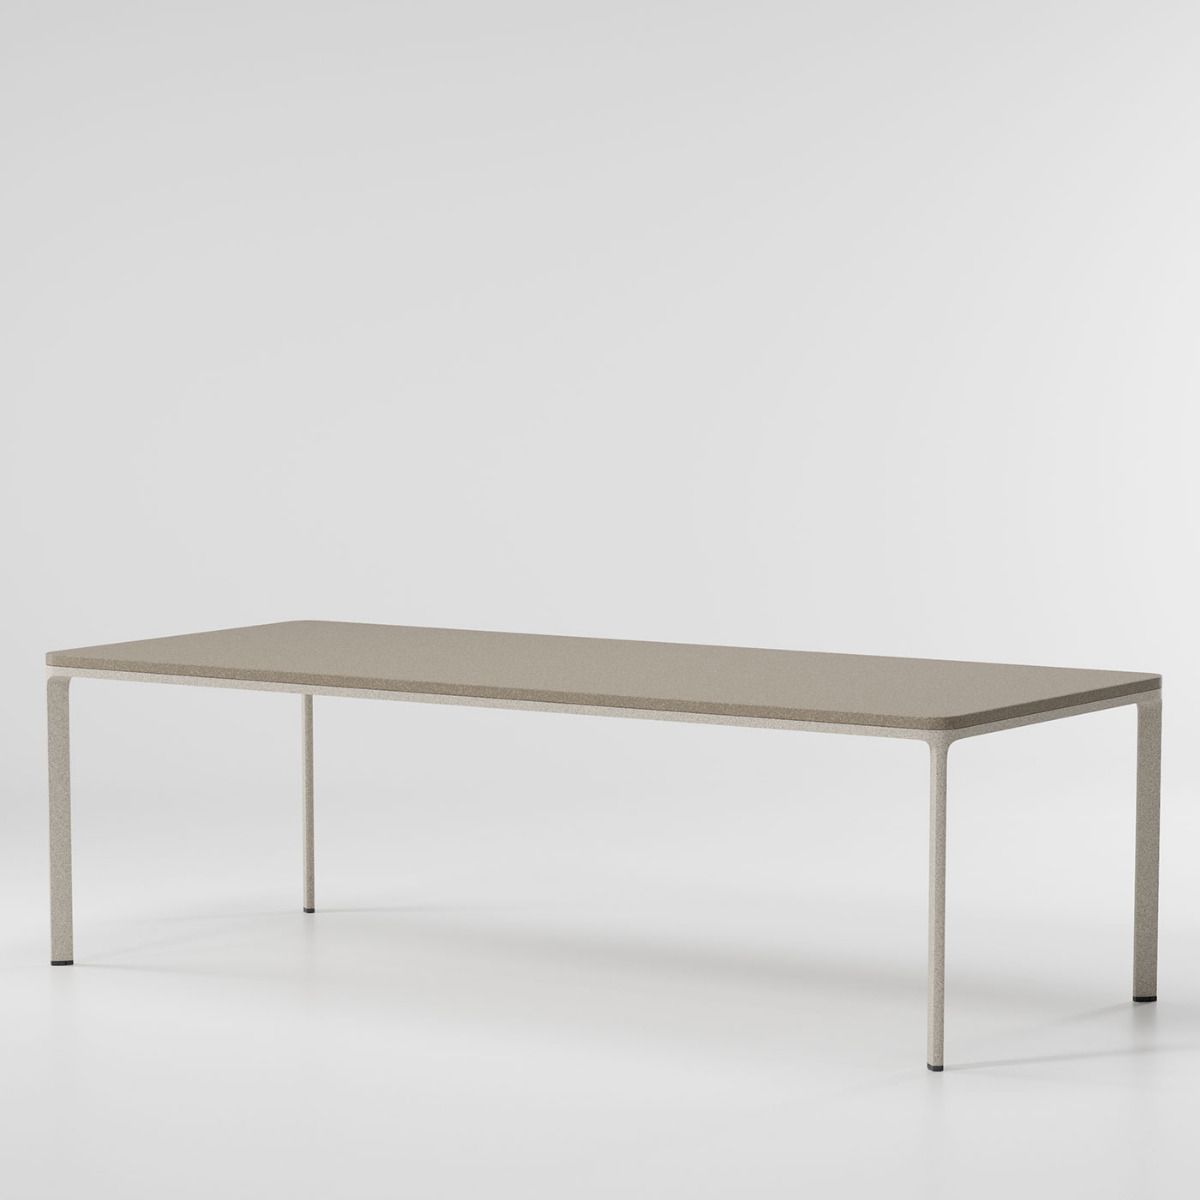 Kettal Park Life Low Dining Table 220x94 - 8 Guests